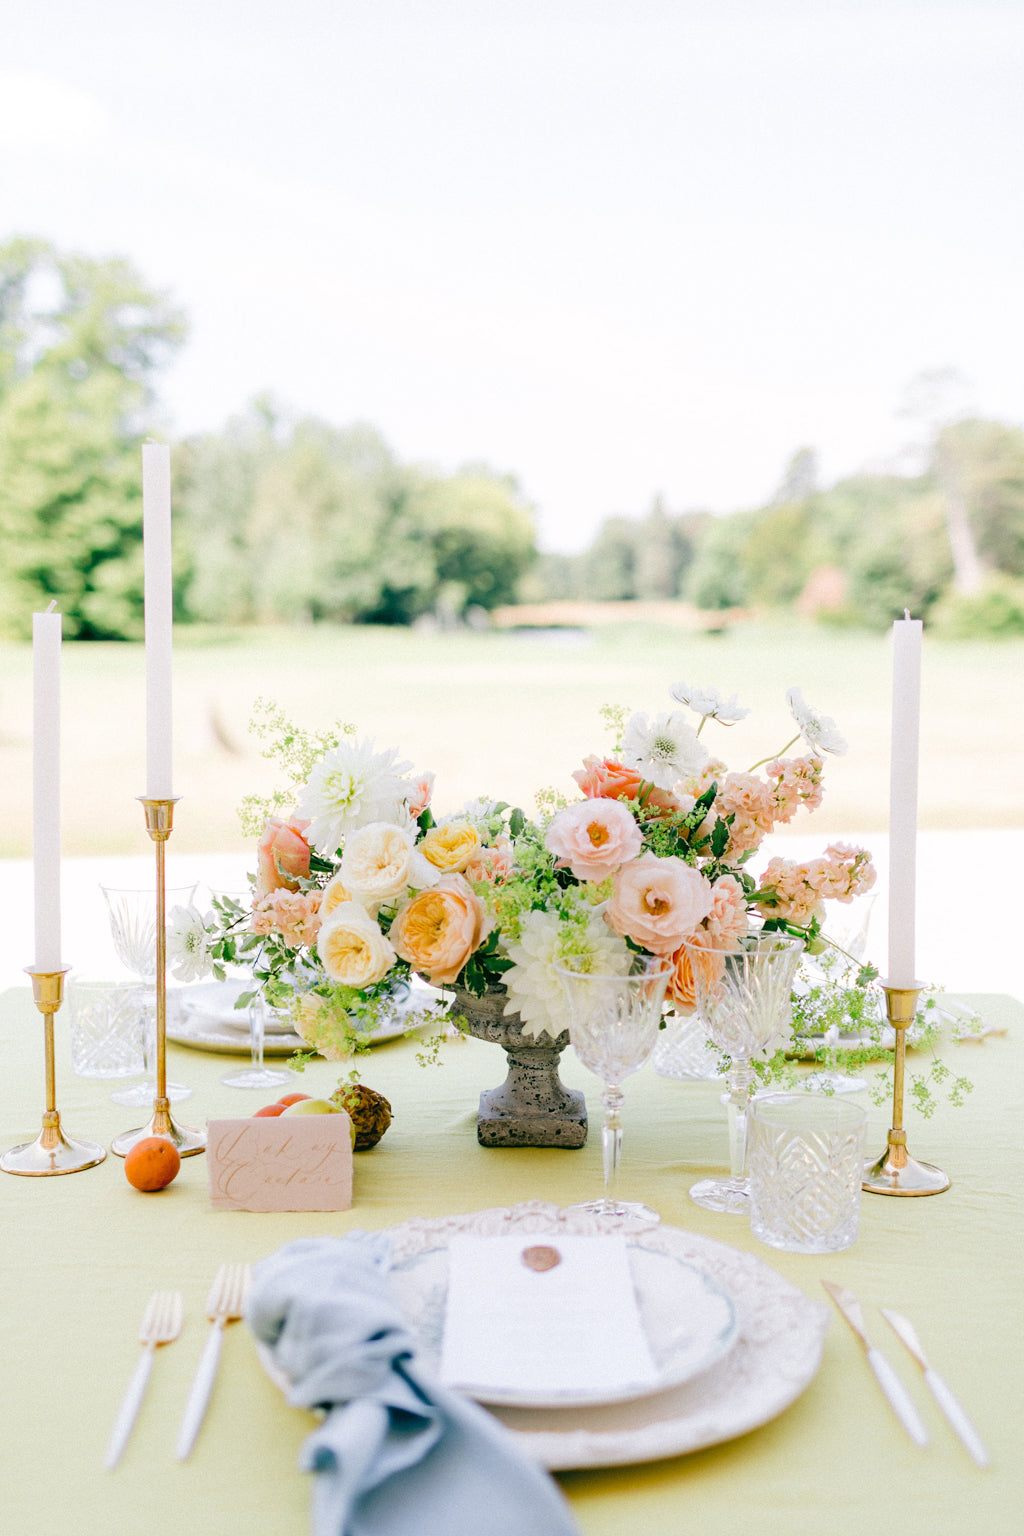 Yellow Tablecloth from Madame de la Maison | Pantone color of the year 